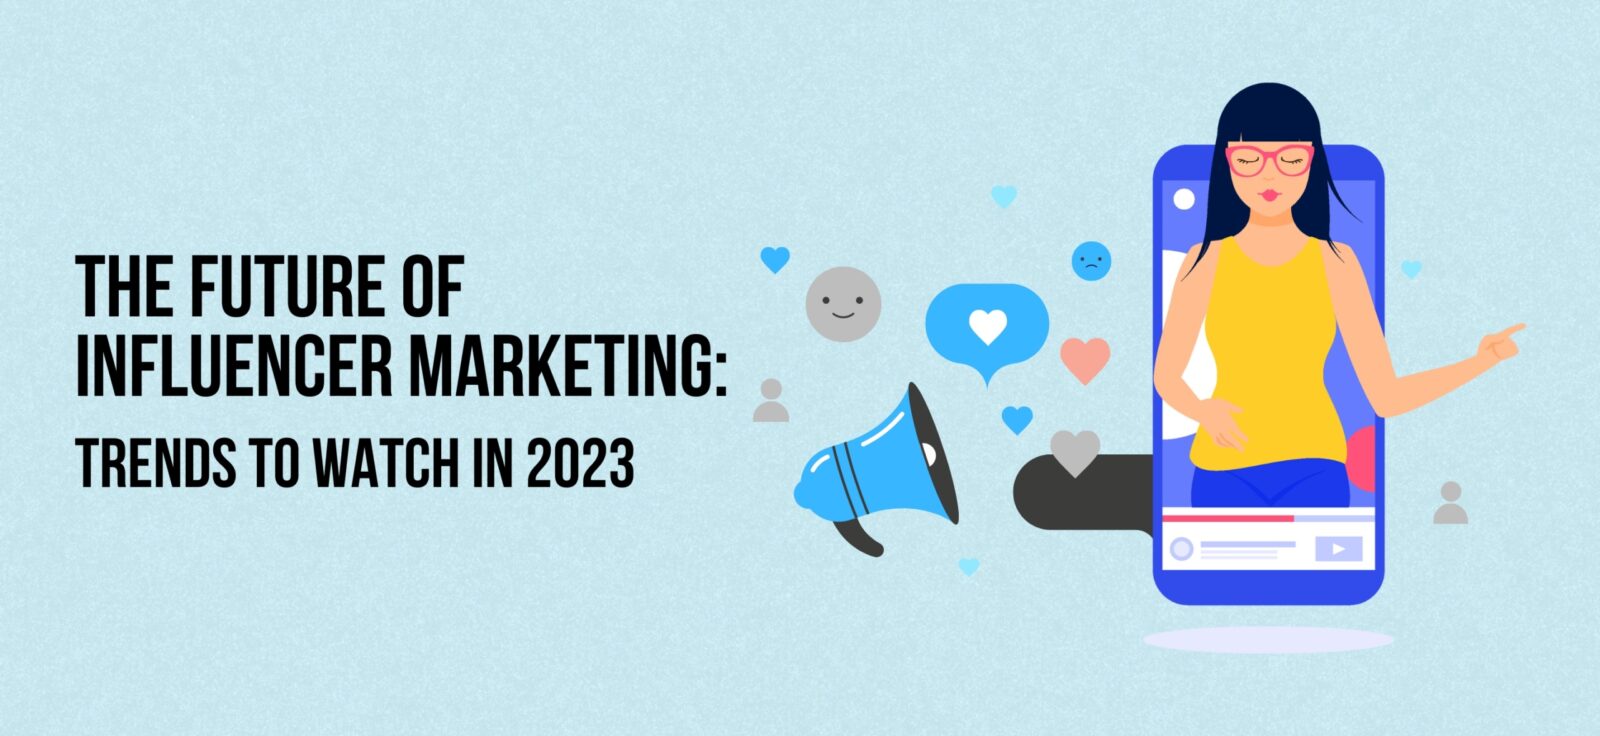 The Future of Influencer Marketing: Trends to Watch in 2023